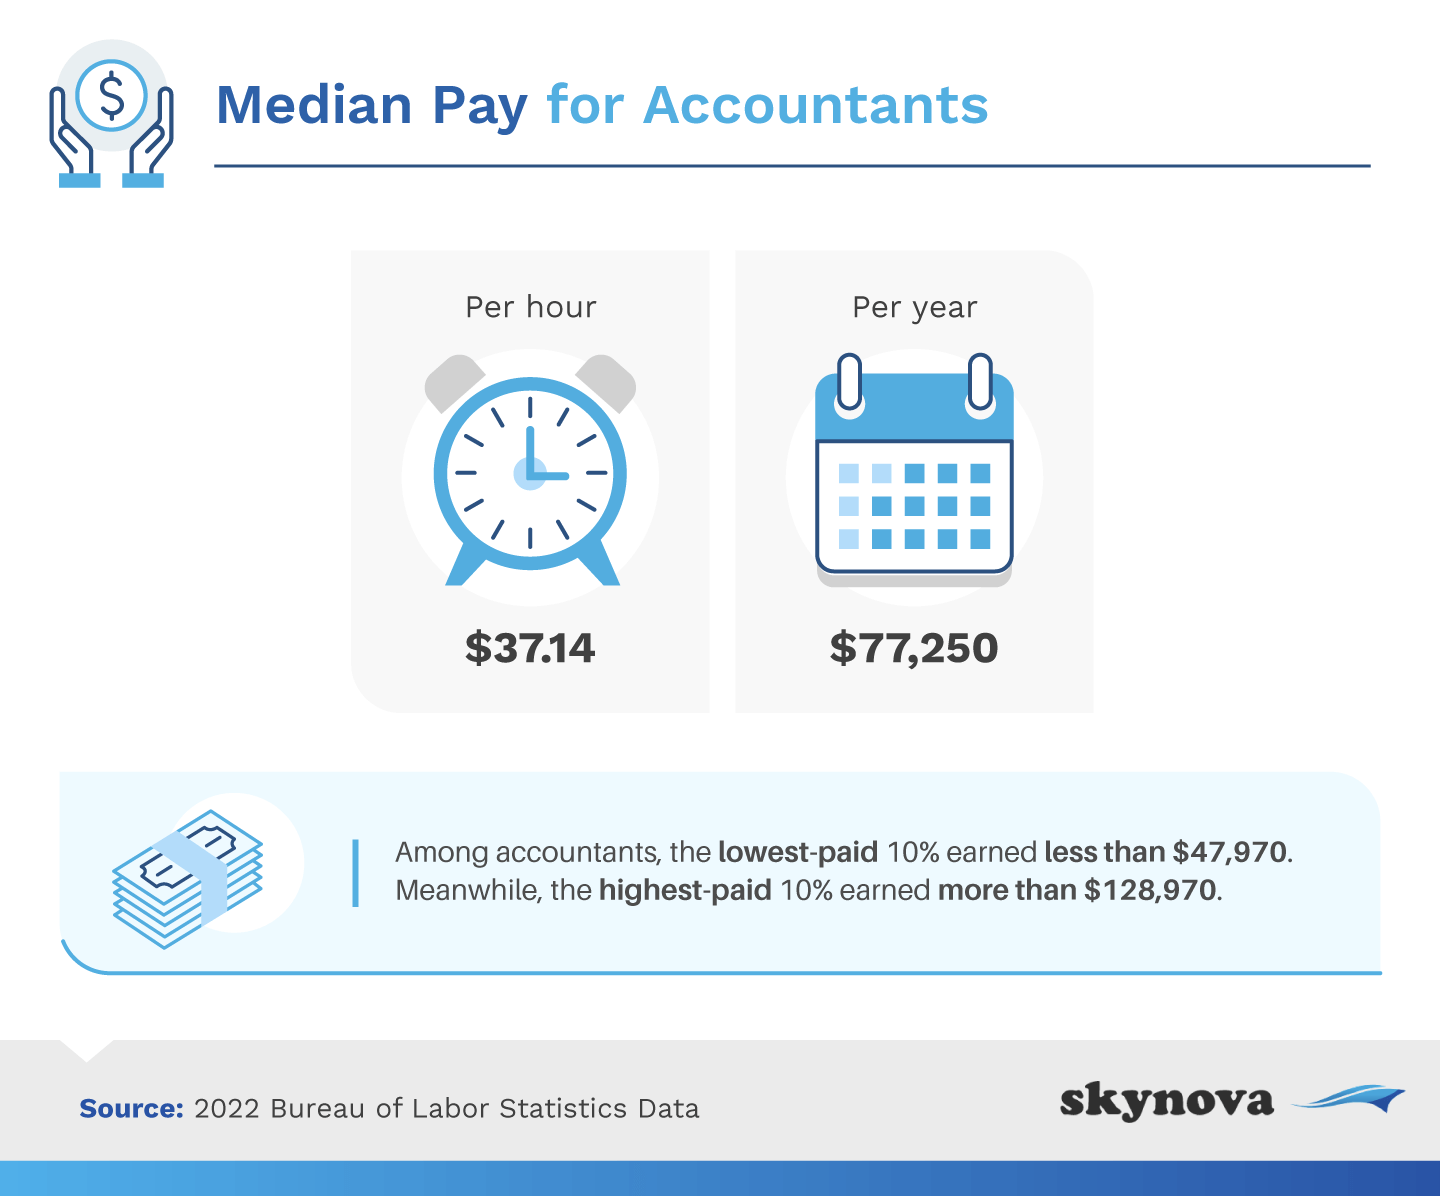 Median pay for accountants